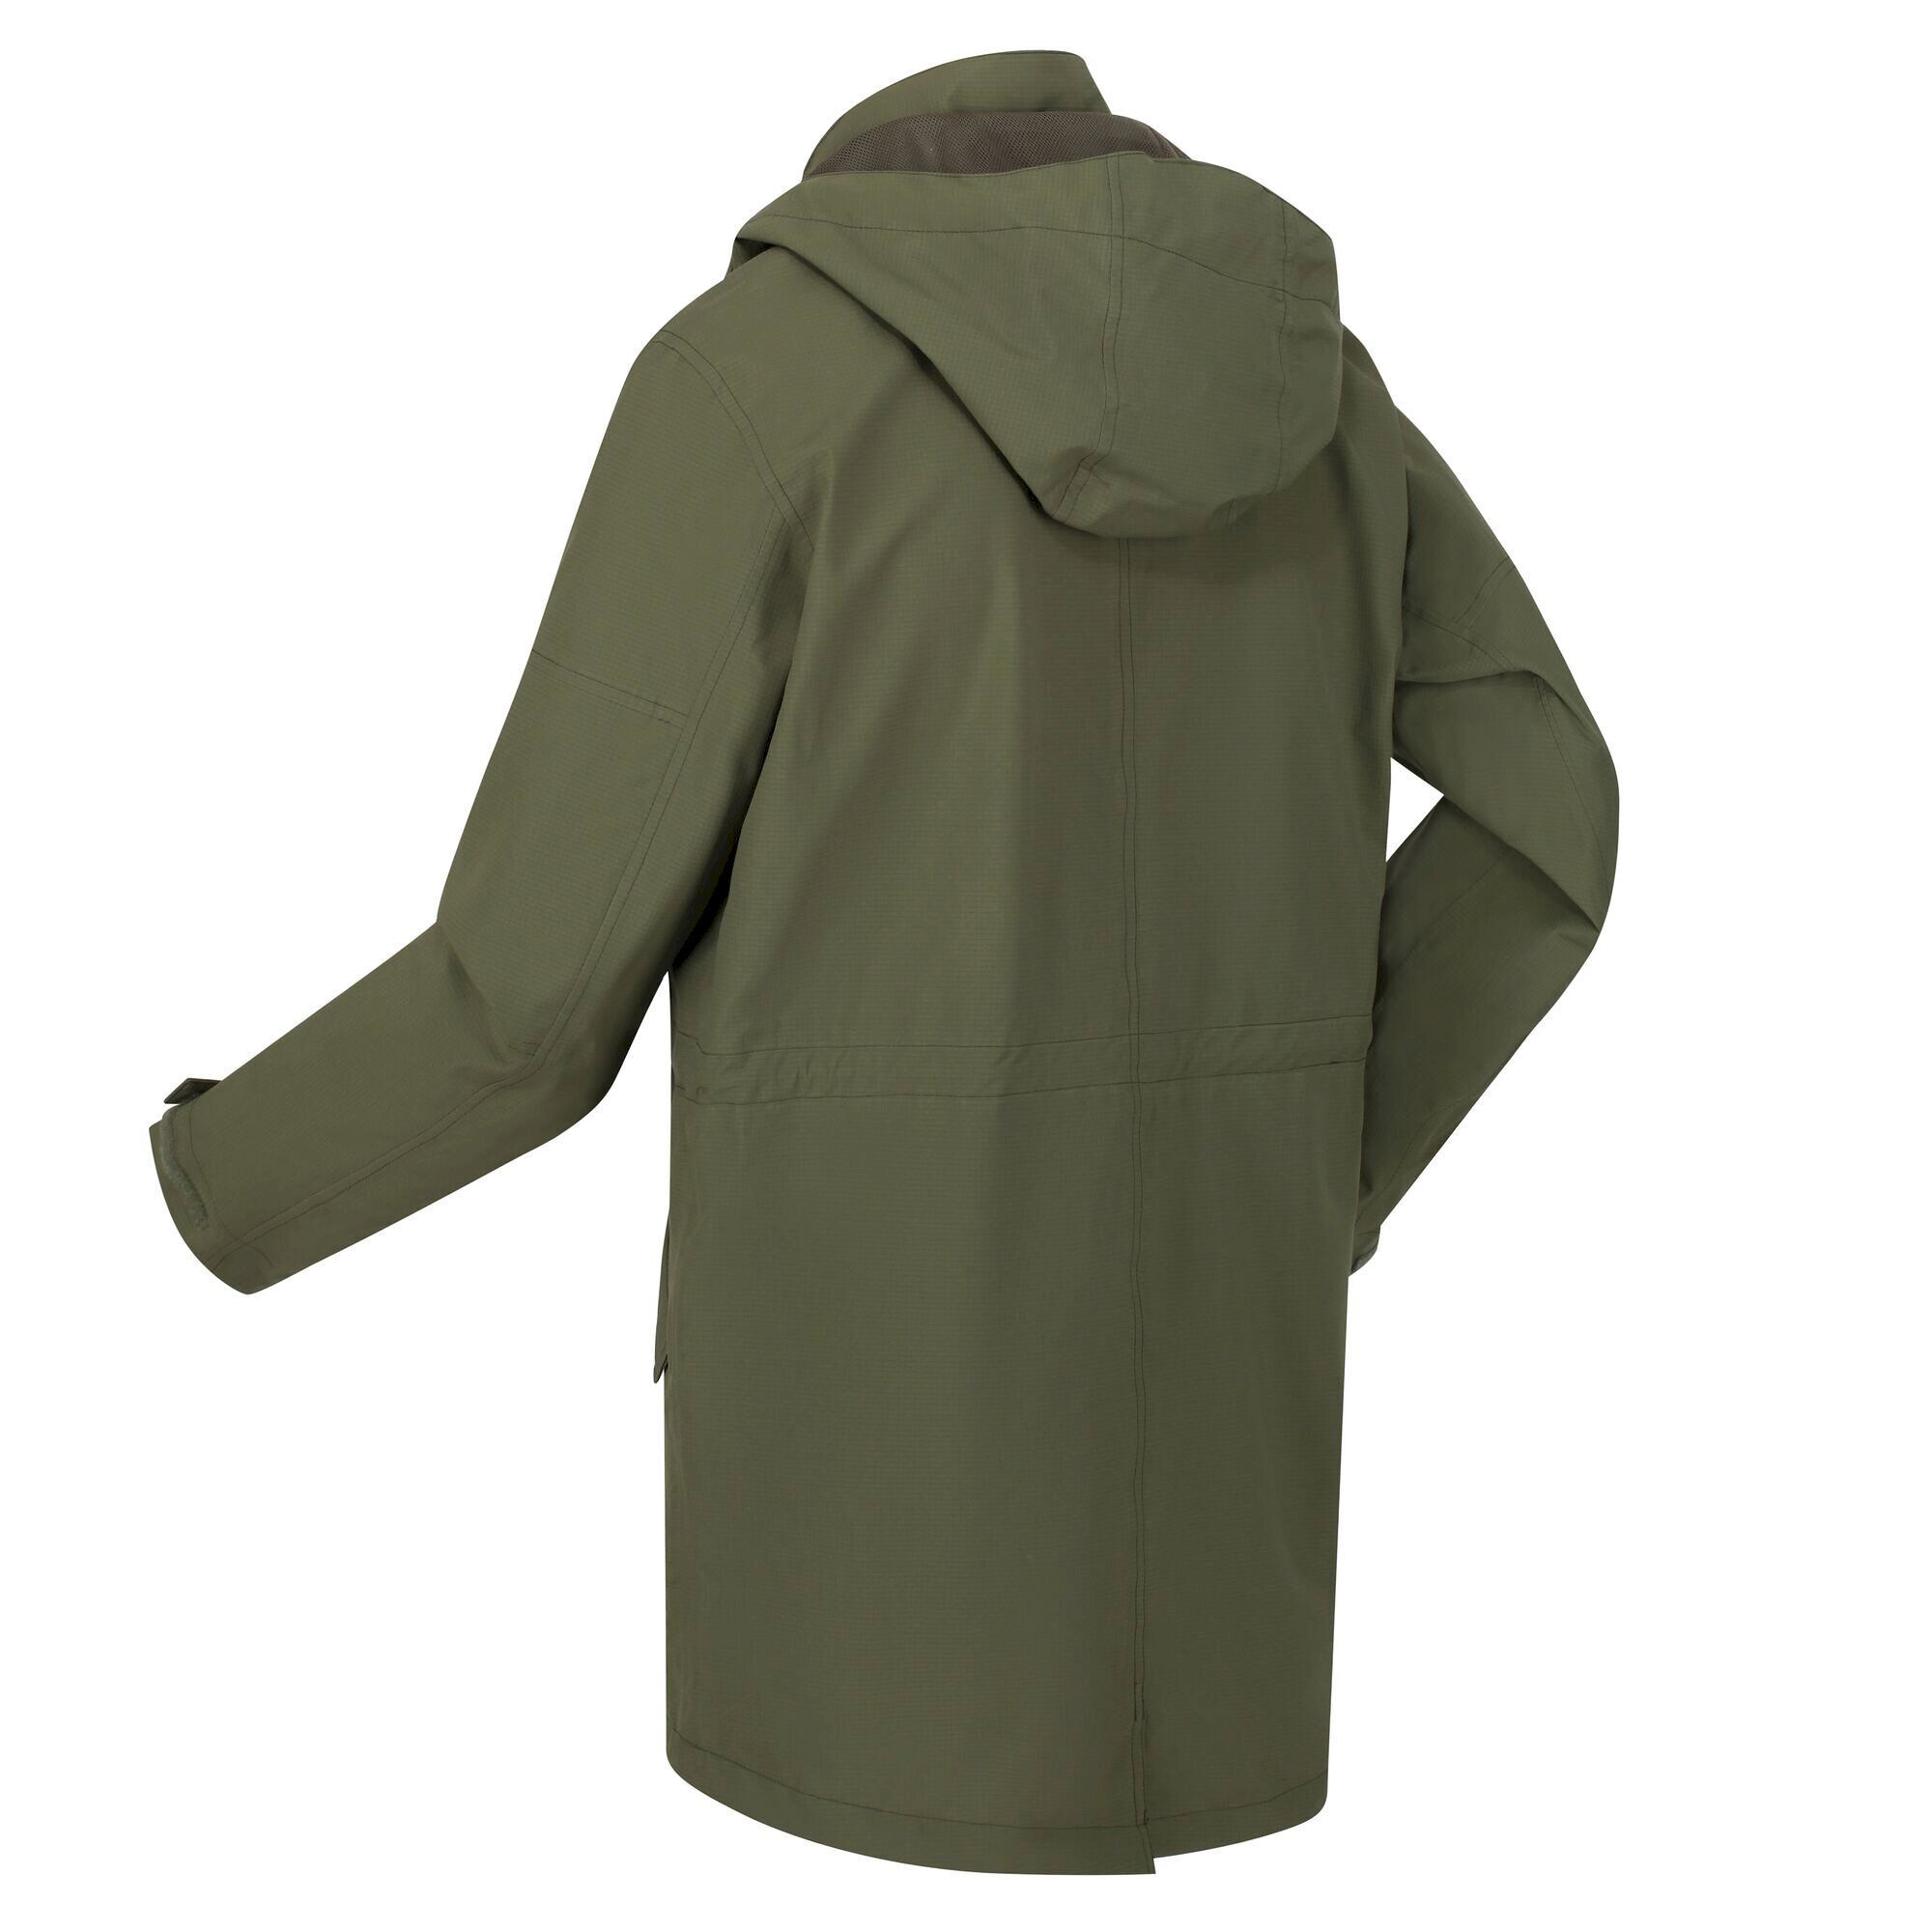 Fabric: Isotex. Design: Logo, Plain. Fabric Technology: Breathable. Taped Seams, Waterproof. Neckline: Hooded. Sleeve-Type: Long-Sleeved. Hood Features: Drawcord, Grown On Hood. Pockets: 2 Side Pockets, Buttoned, 1 Chest Pocket, 1 Arm Pocket, Zip. Fastening: Button-Down, Full Zip. Hem: Fishtail. Waistline: Drawcord.